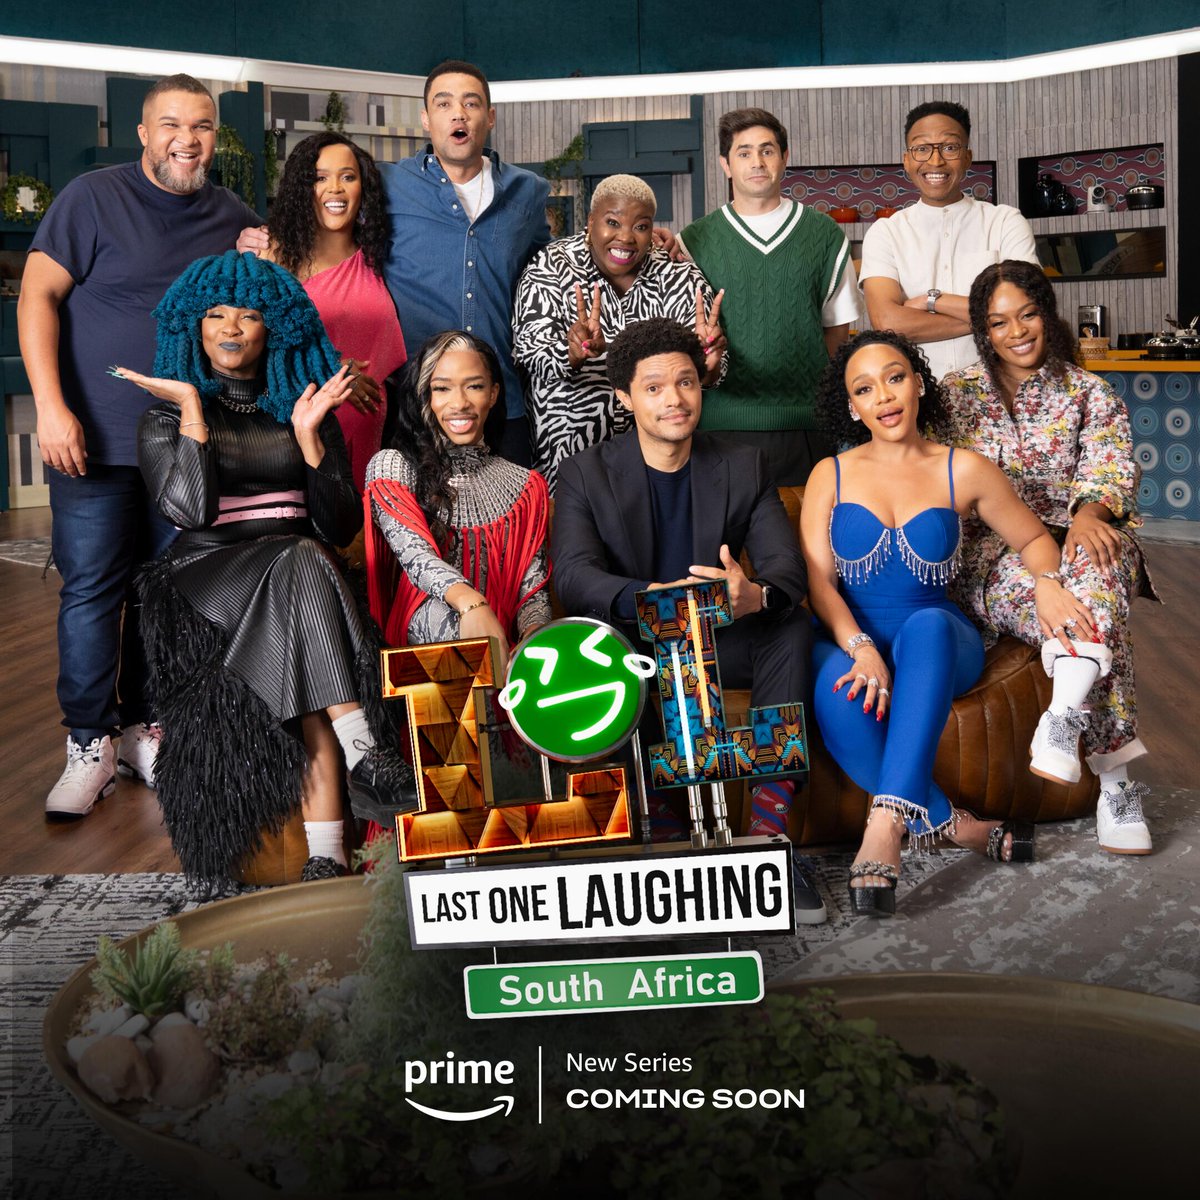 Mzansi, say hello to your Last One Laughing: South Africa cast! See how well our contestants fare at making each other laugh out loud whilst keeping silent themselves 🤫 #LastOneLaughingZA